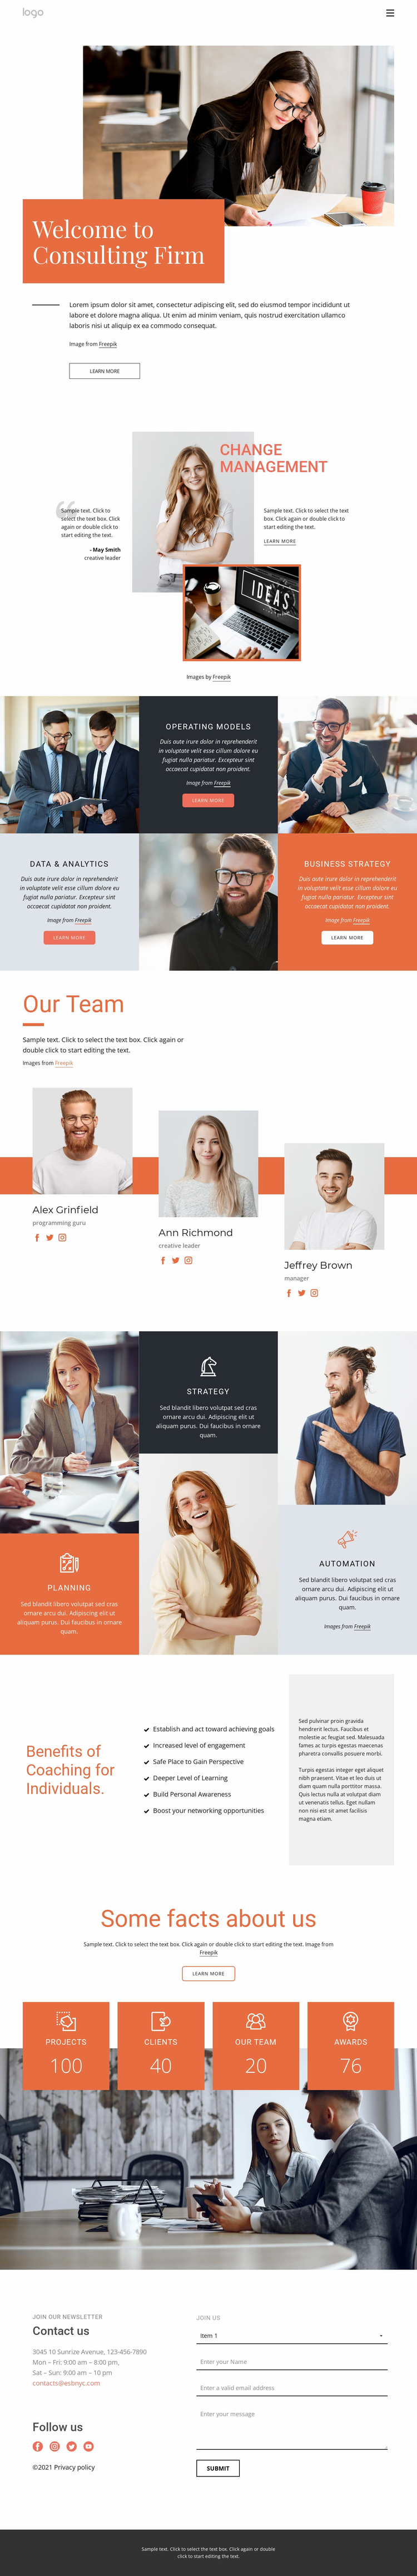 Consulting firm eCommerce Template